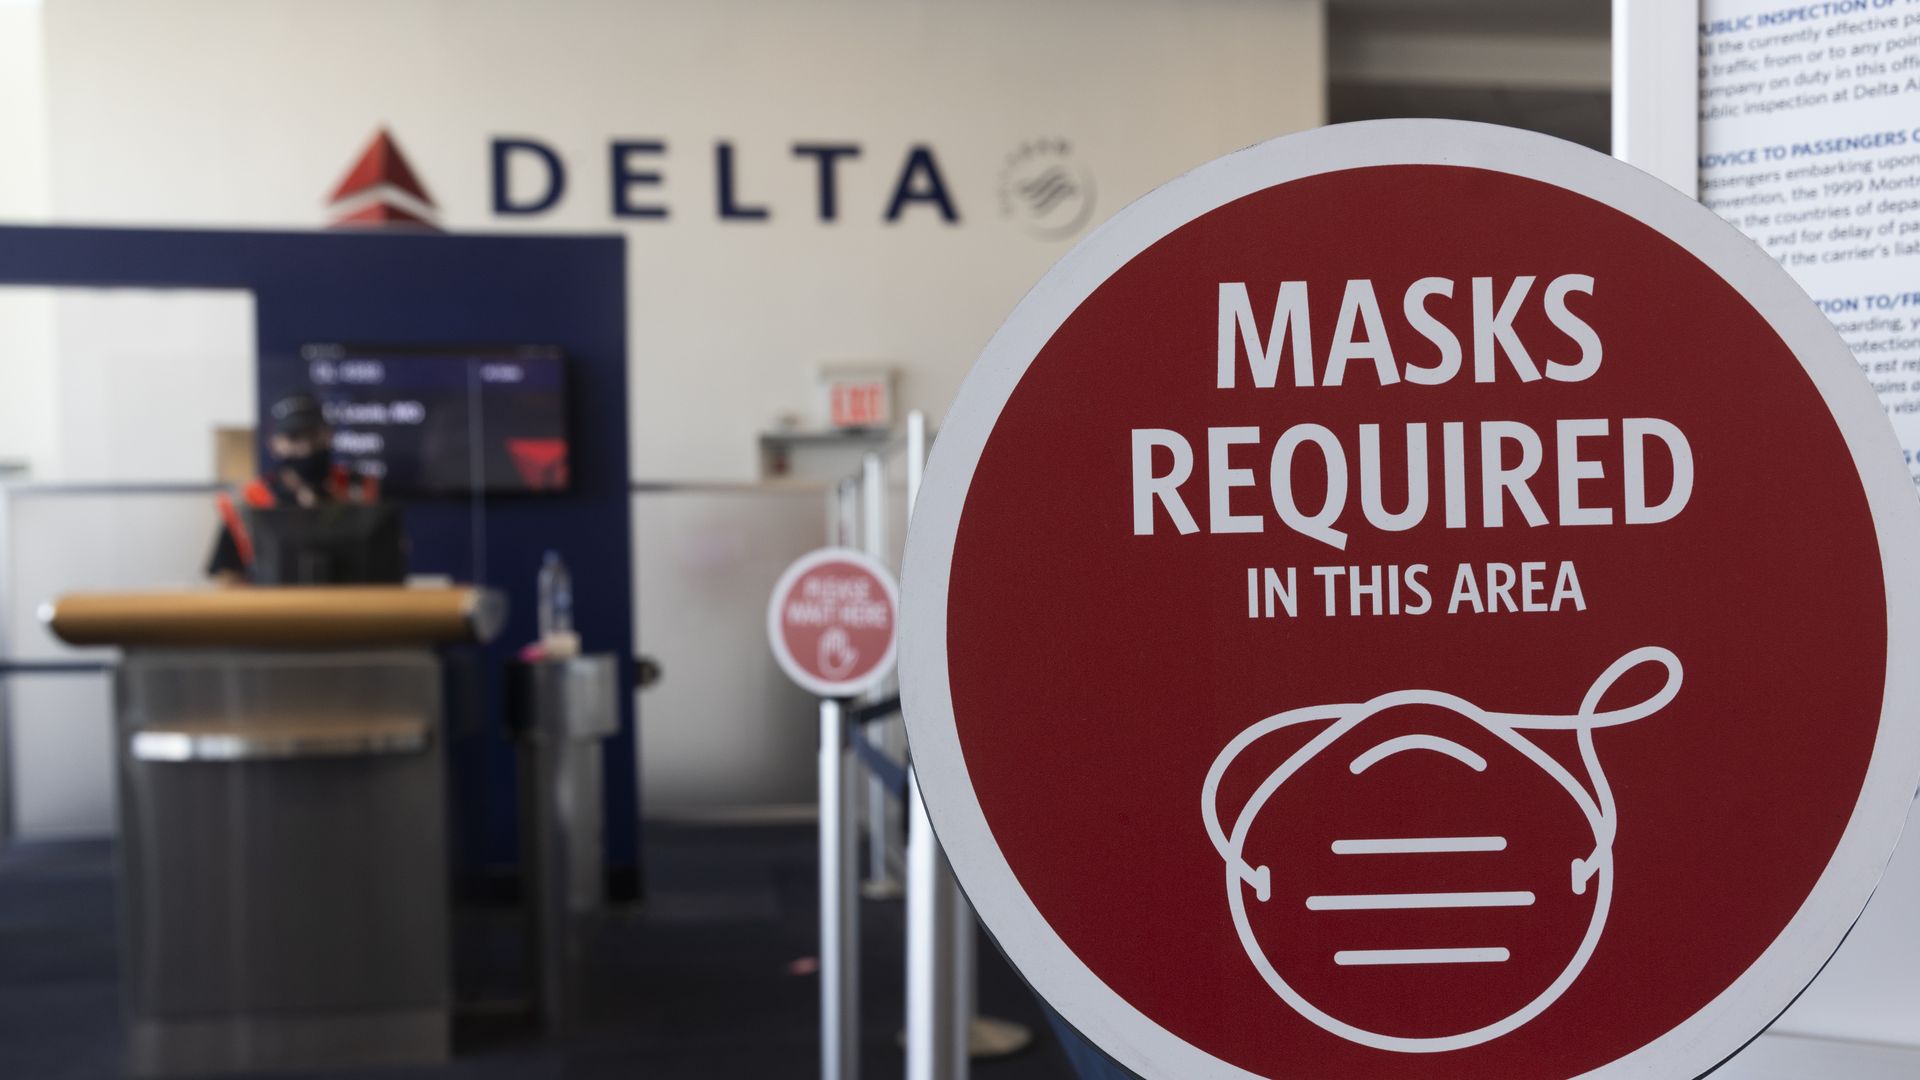 A "Masks Required" sign at a Delta Air Lines gate in Terminal C of LaGuardia Airport (LGA) in New York, U.S., on Monday, Aug. 2, 2021. 